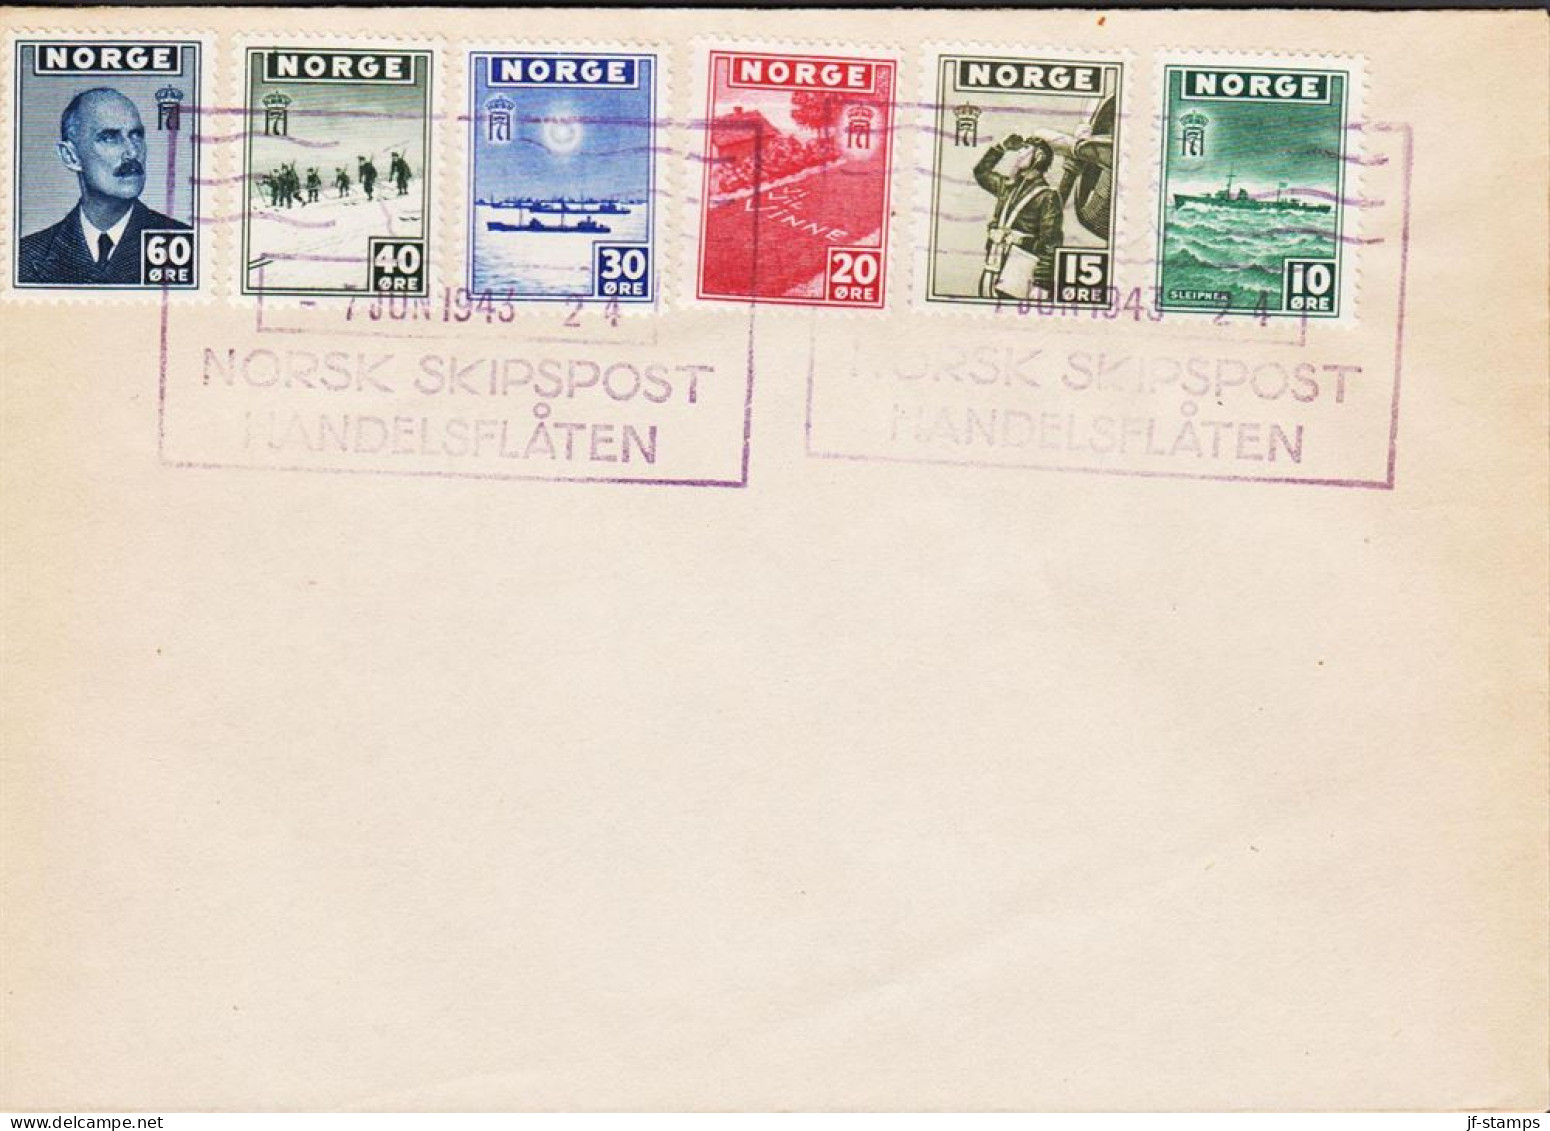 1943. NORGE. Fine Envelope With 10, 15, 20, 30 40 And 60 ØRE London Issue Cancelled With ... (Michel 278-283) - JF545678 - Covers & Documents